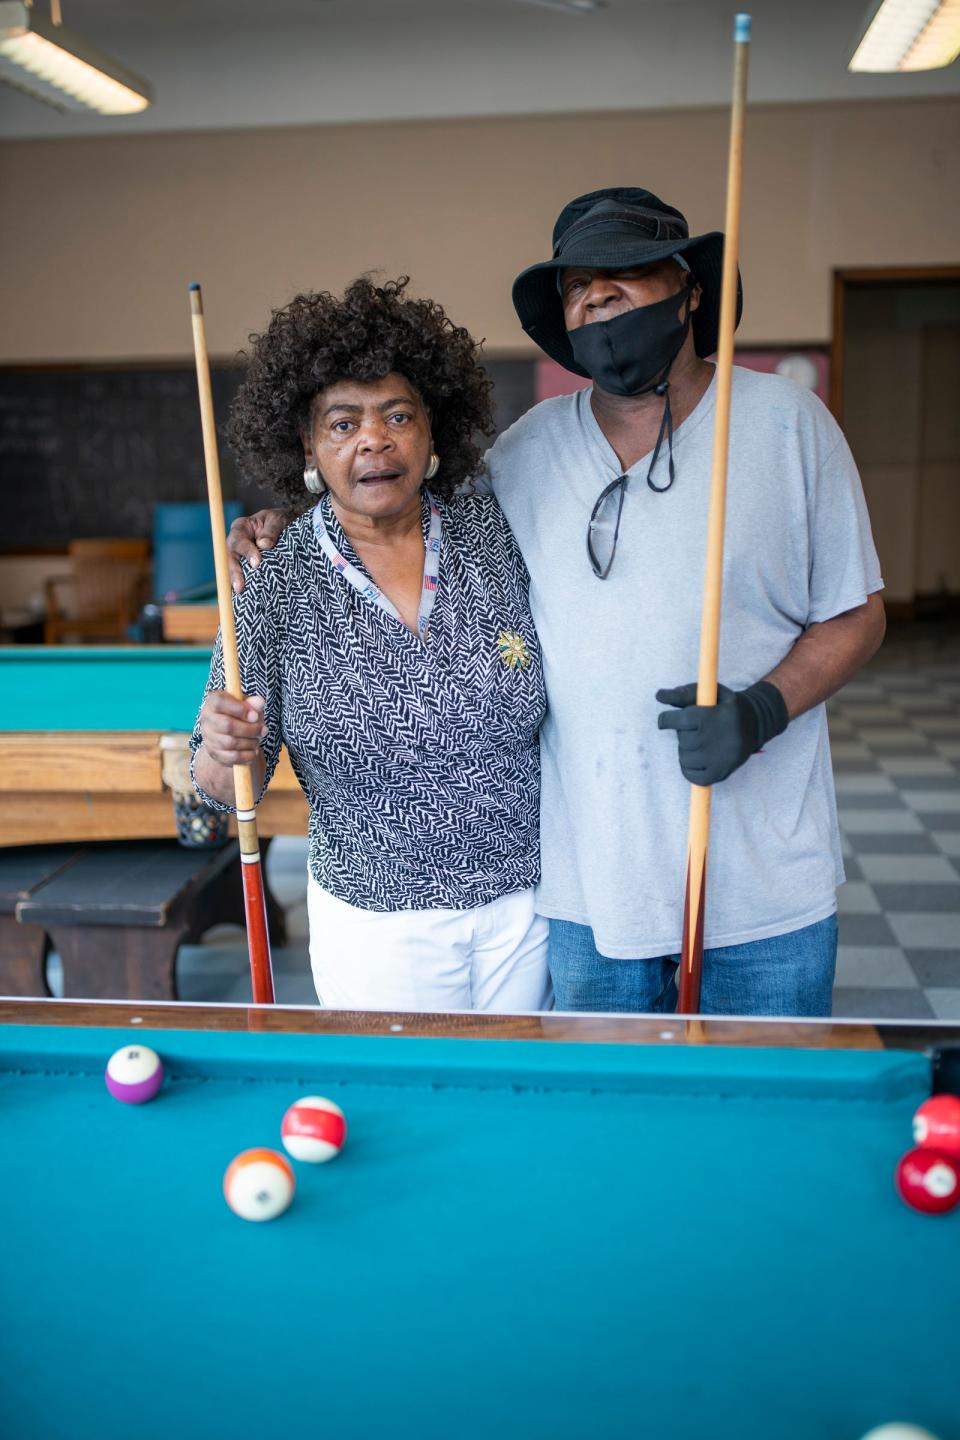 Florence Jones, 70, of Detroit, left, says the secret to a long and happy life is "no smoking, no drinkin'," her pool partner Alandis Long, 66, of Detroit, said 'know God' as they play some pool at St. Patrick Senior Center Inc. in Detroit on July 26, 2023. The Free Press asked seniors to reflect on what the secrets are to living a long and happy life.